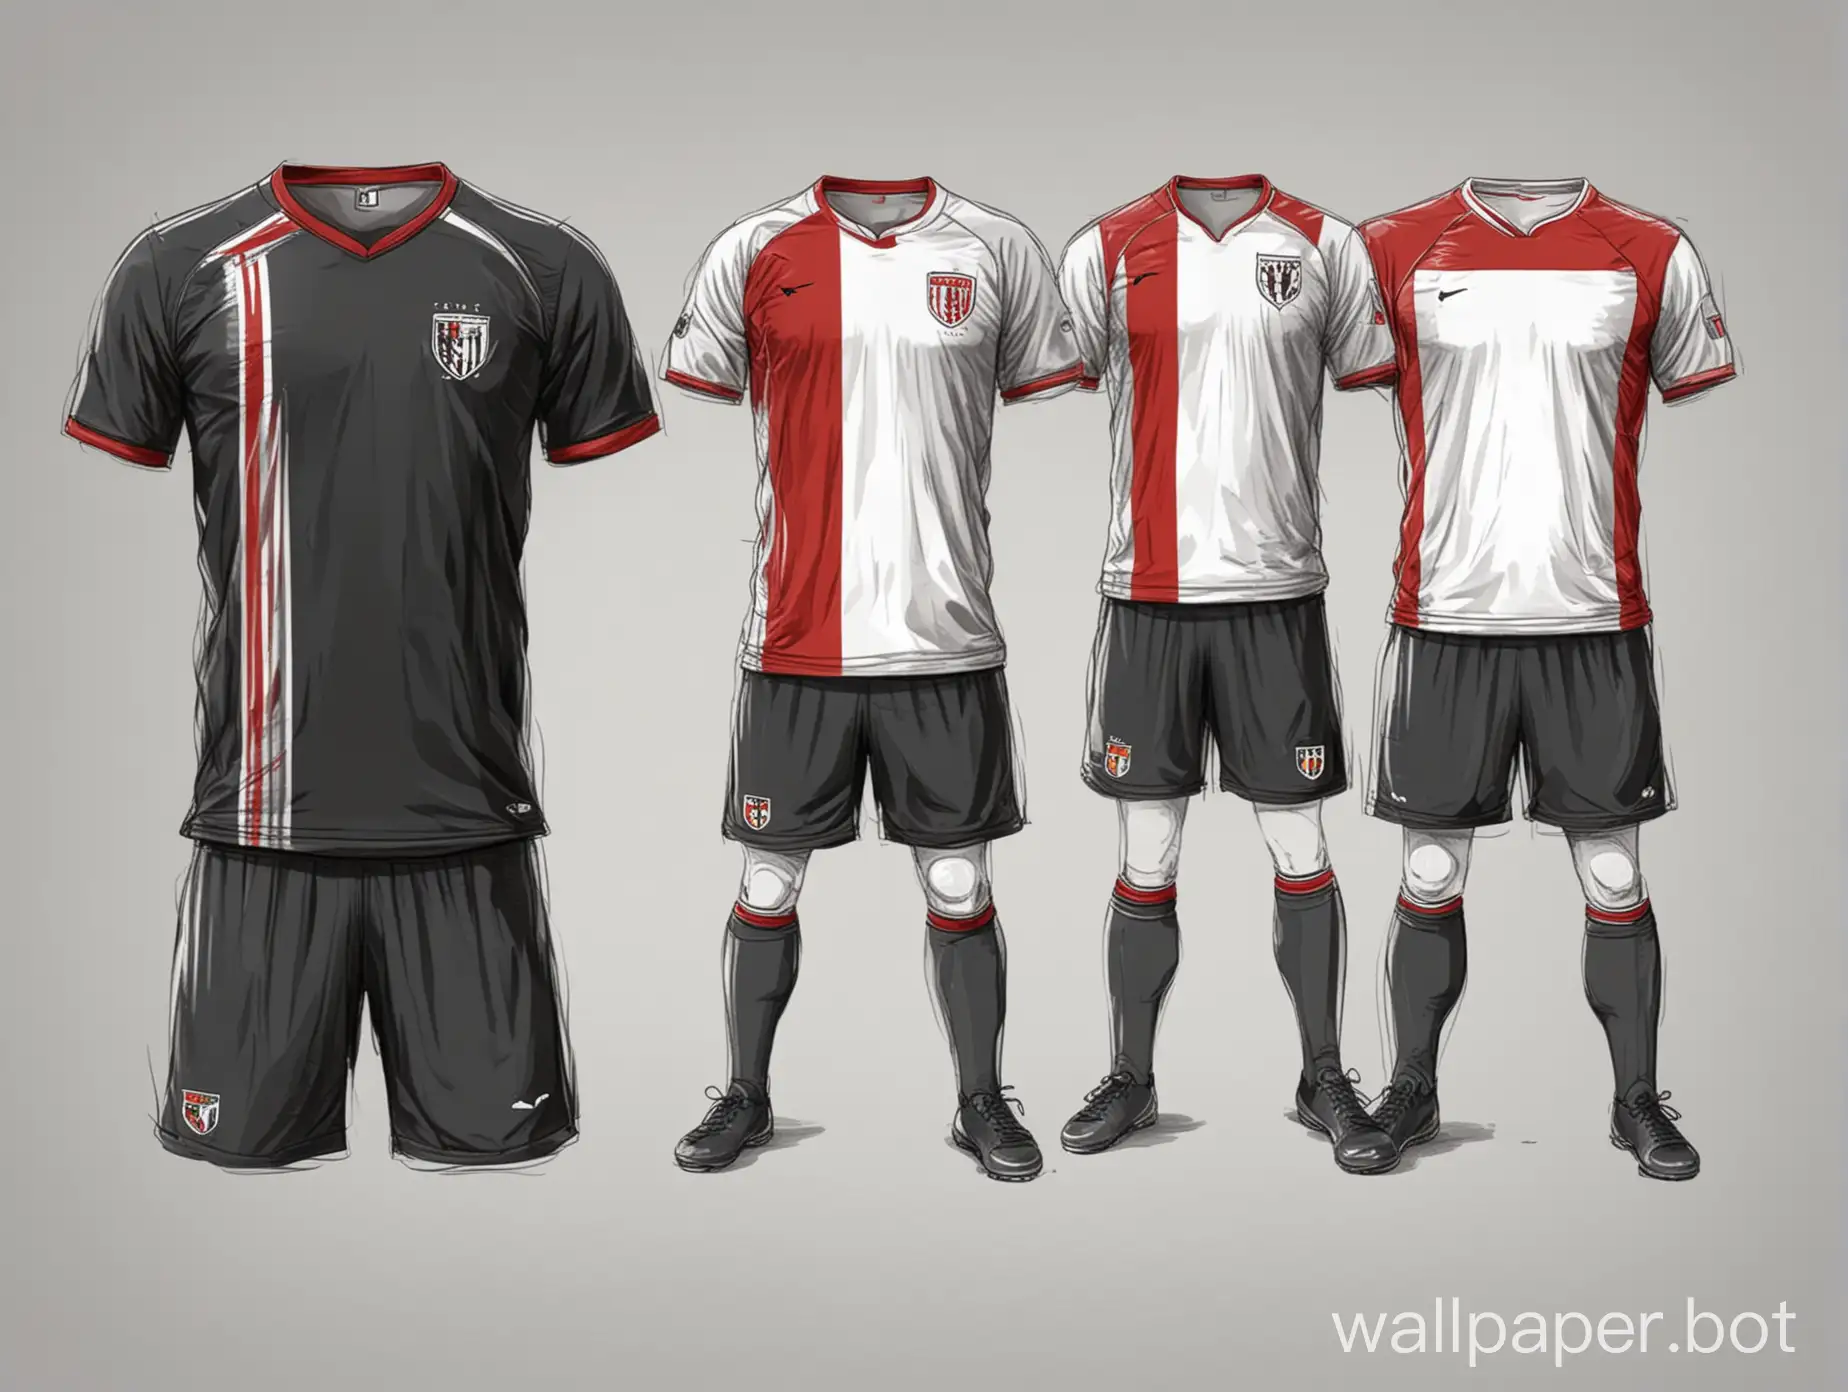 Soccer-Players-in-Dynamic-Black-Gray-and-Red-Uniforms-on-a-White-Background-Sketch